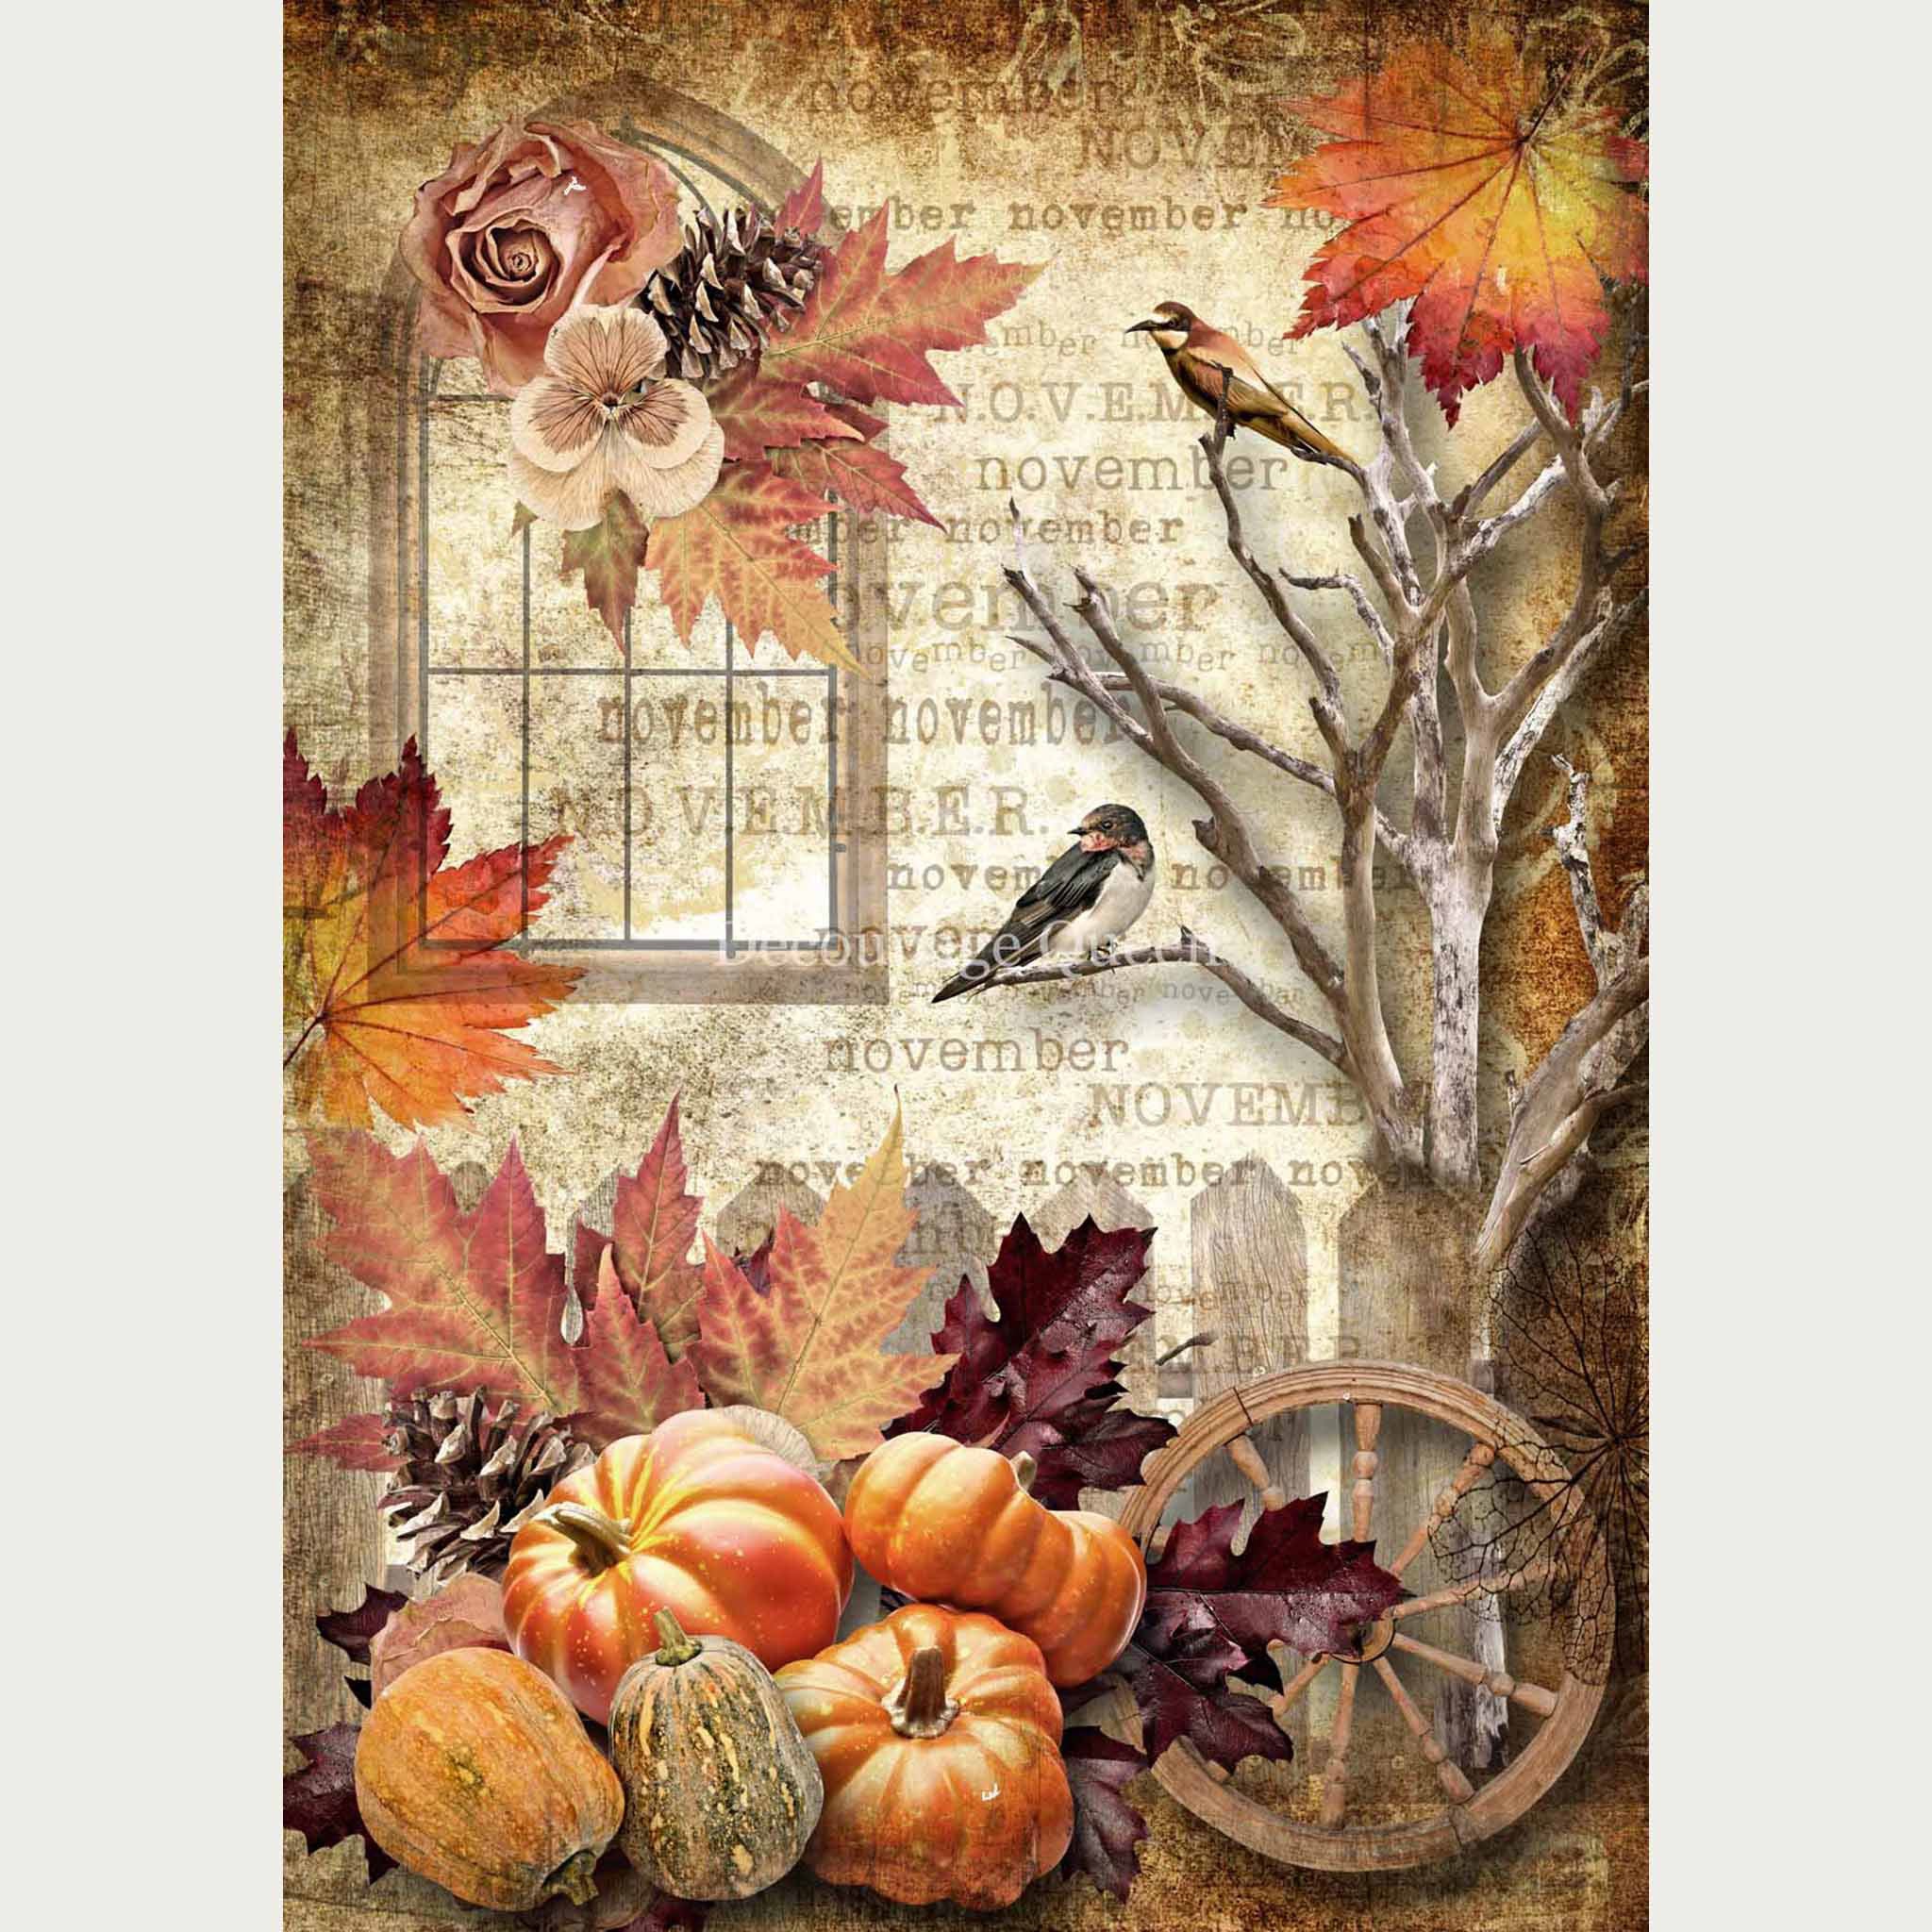 A3 rice paper design of pumpkins and gourds on a fall background. White borders are on the sides.